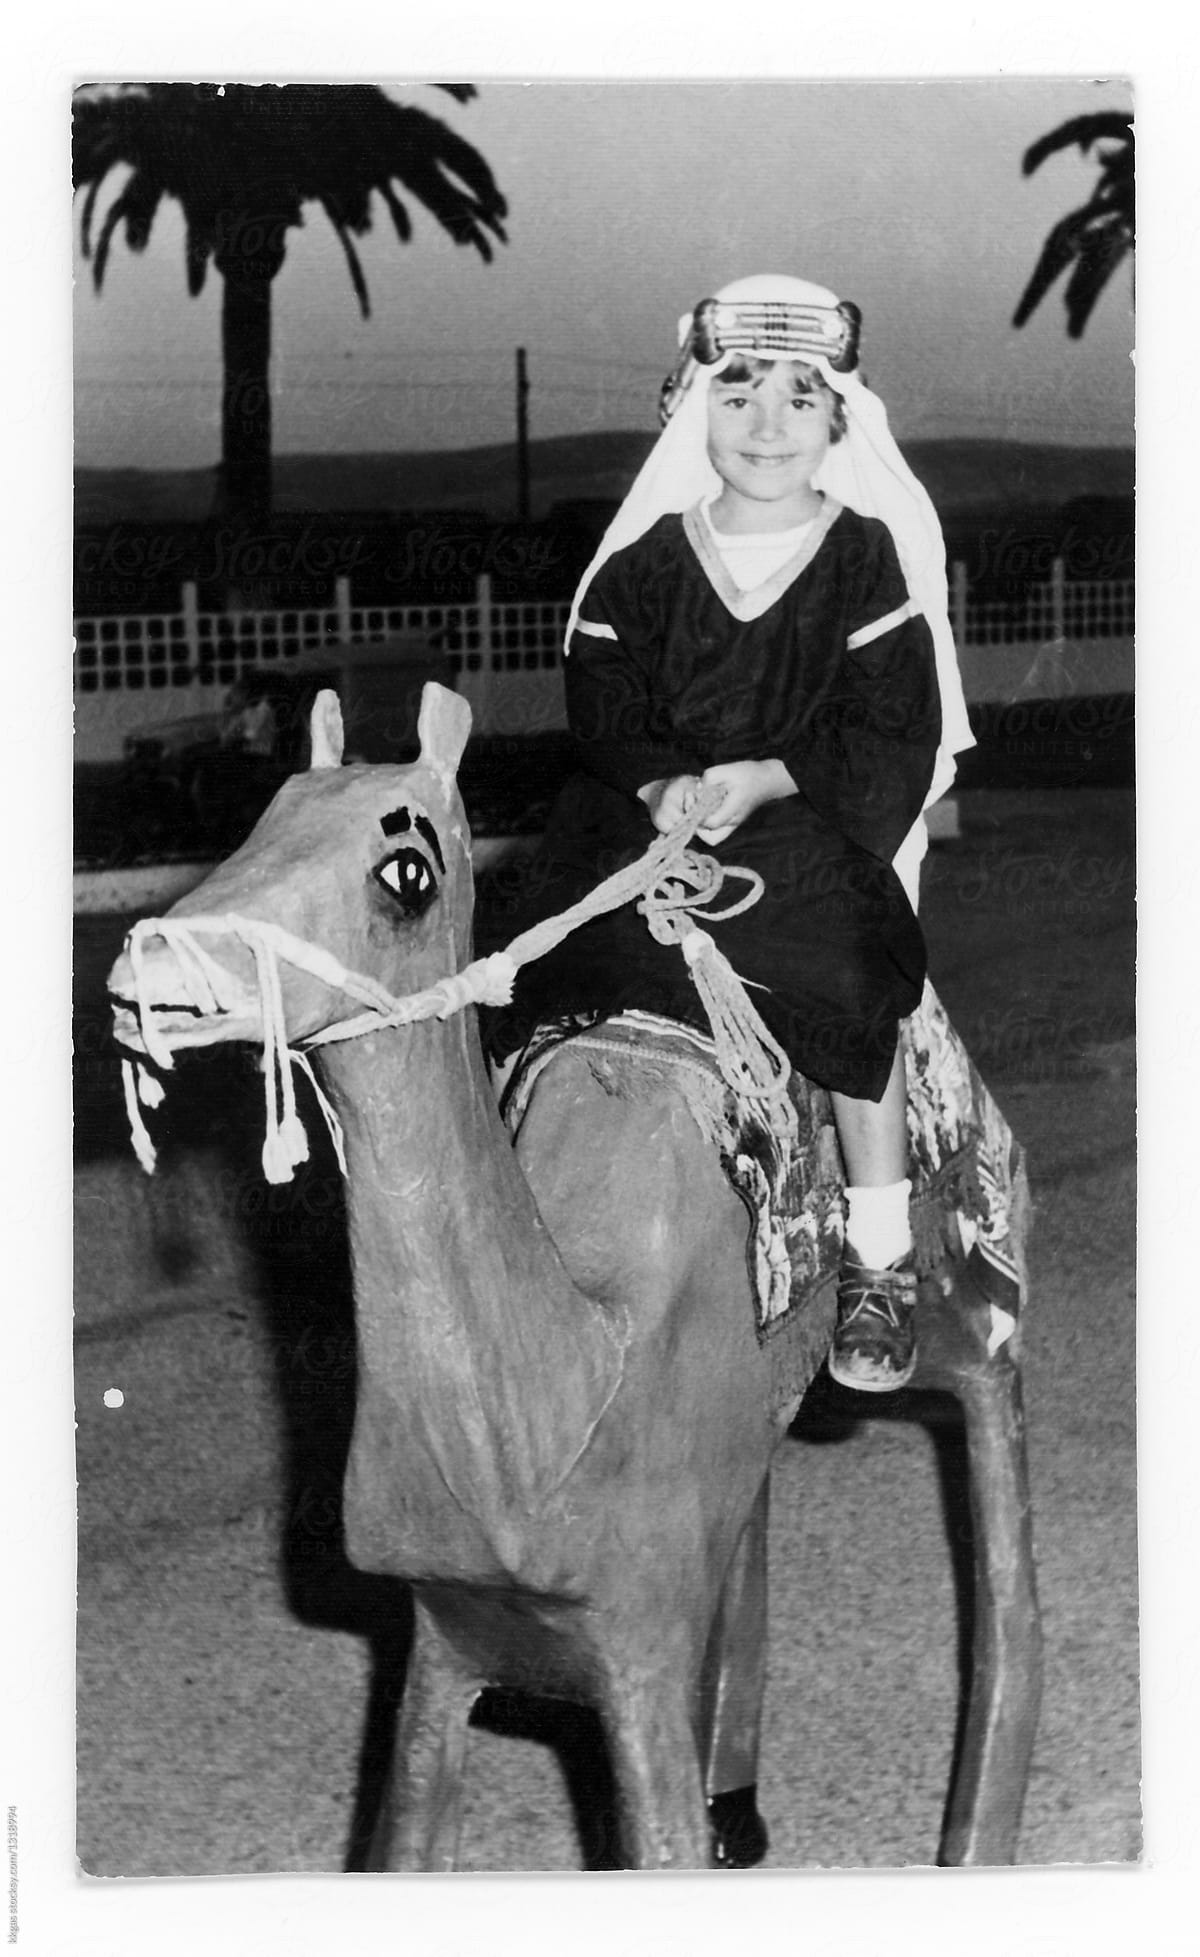 Black and white print of a little boy dressed in costume riding a toy camel